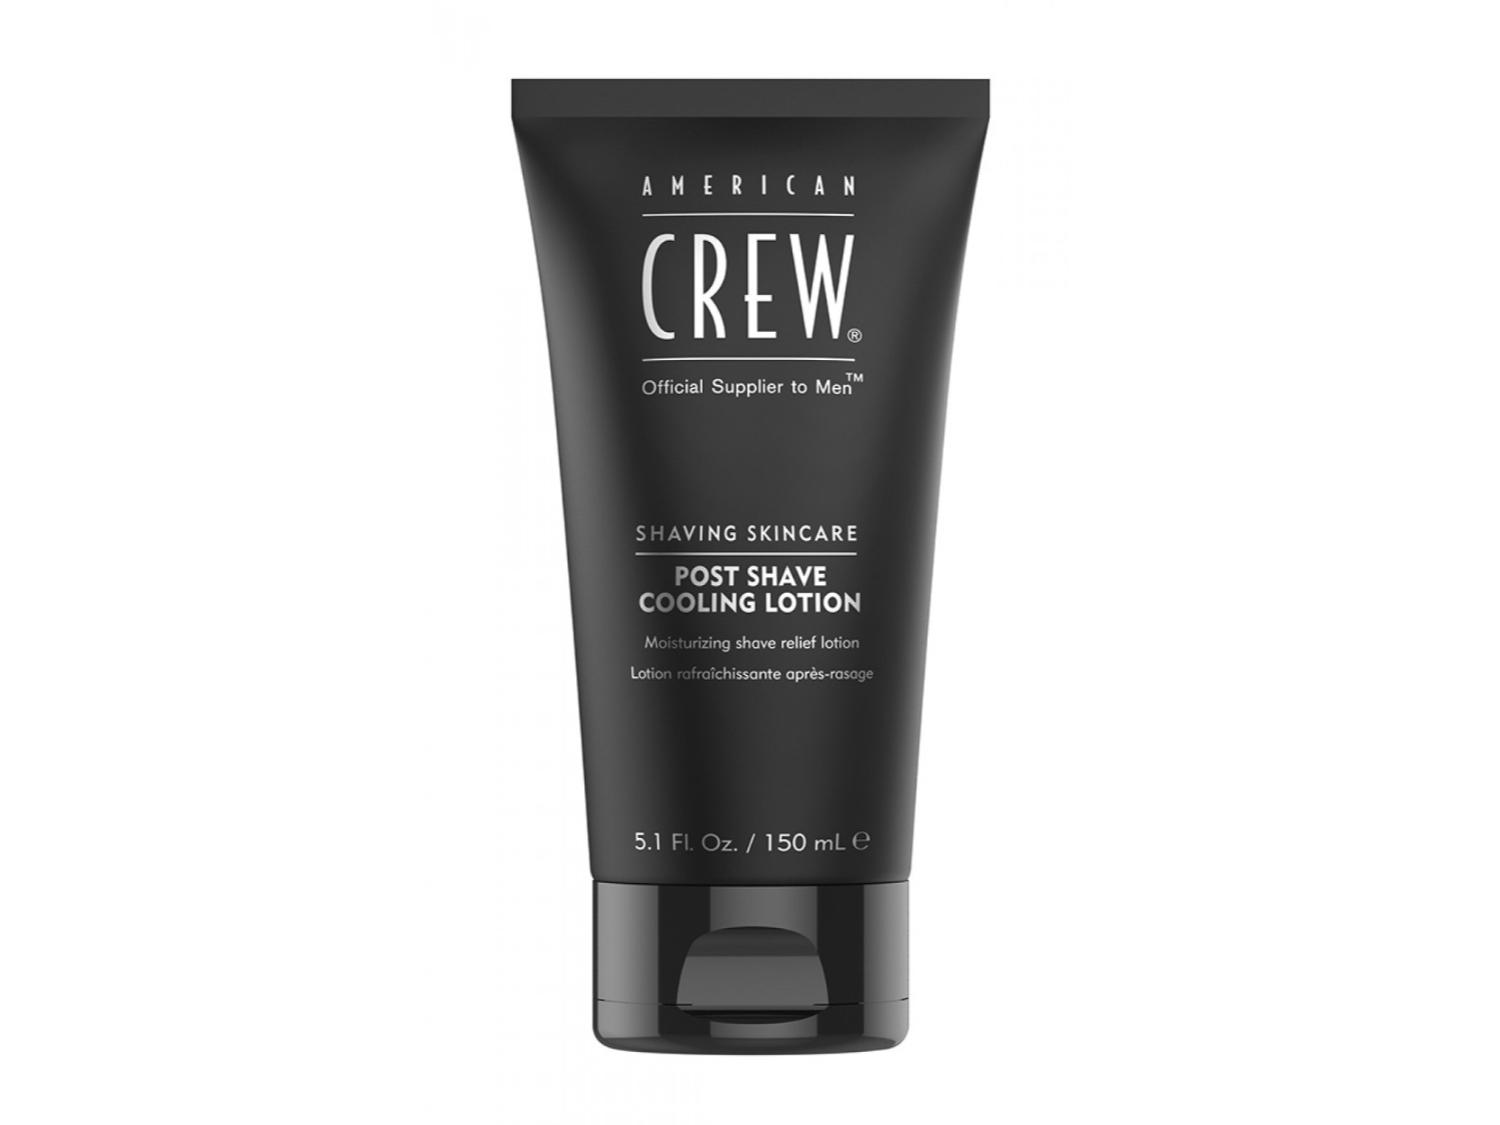 Arma Beauty - American Crew - Post Shave Cooling Lotion